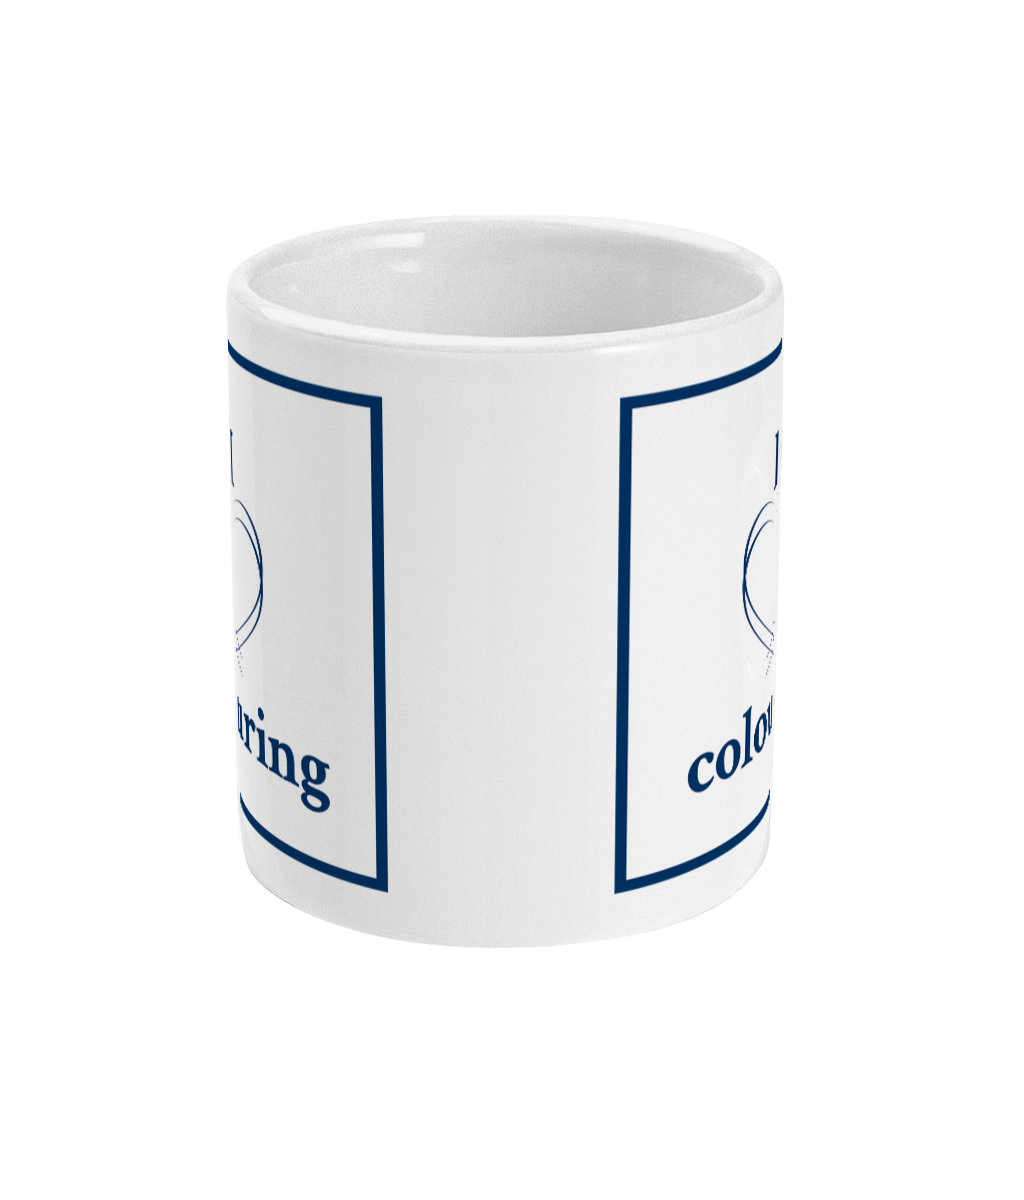 mug with i love colouring printed on it